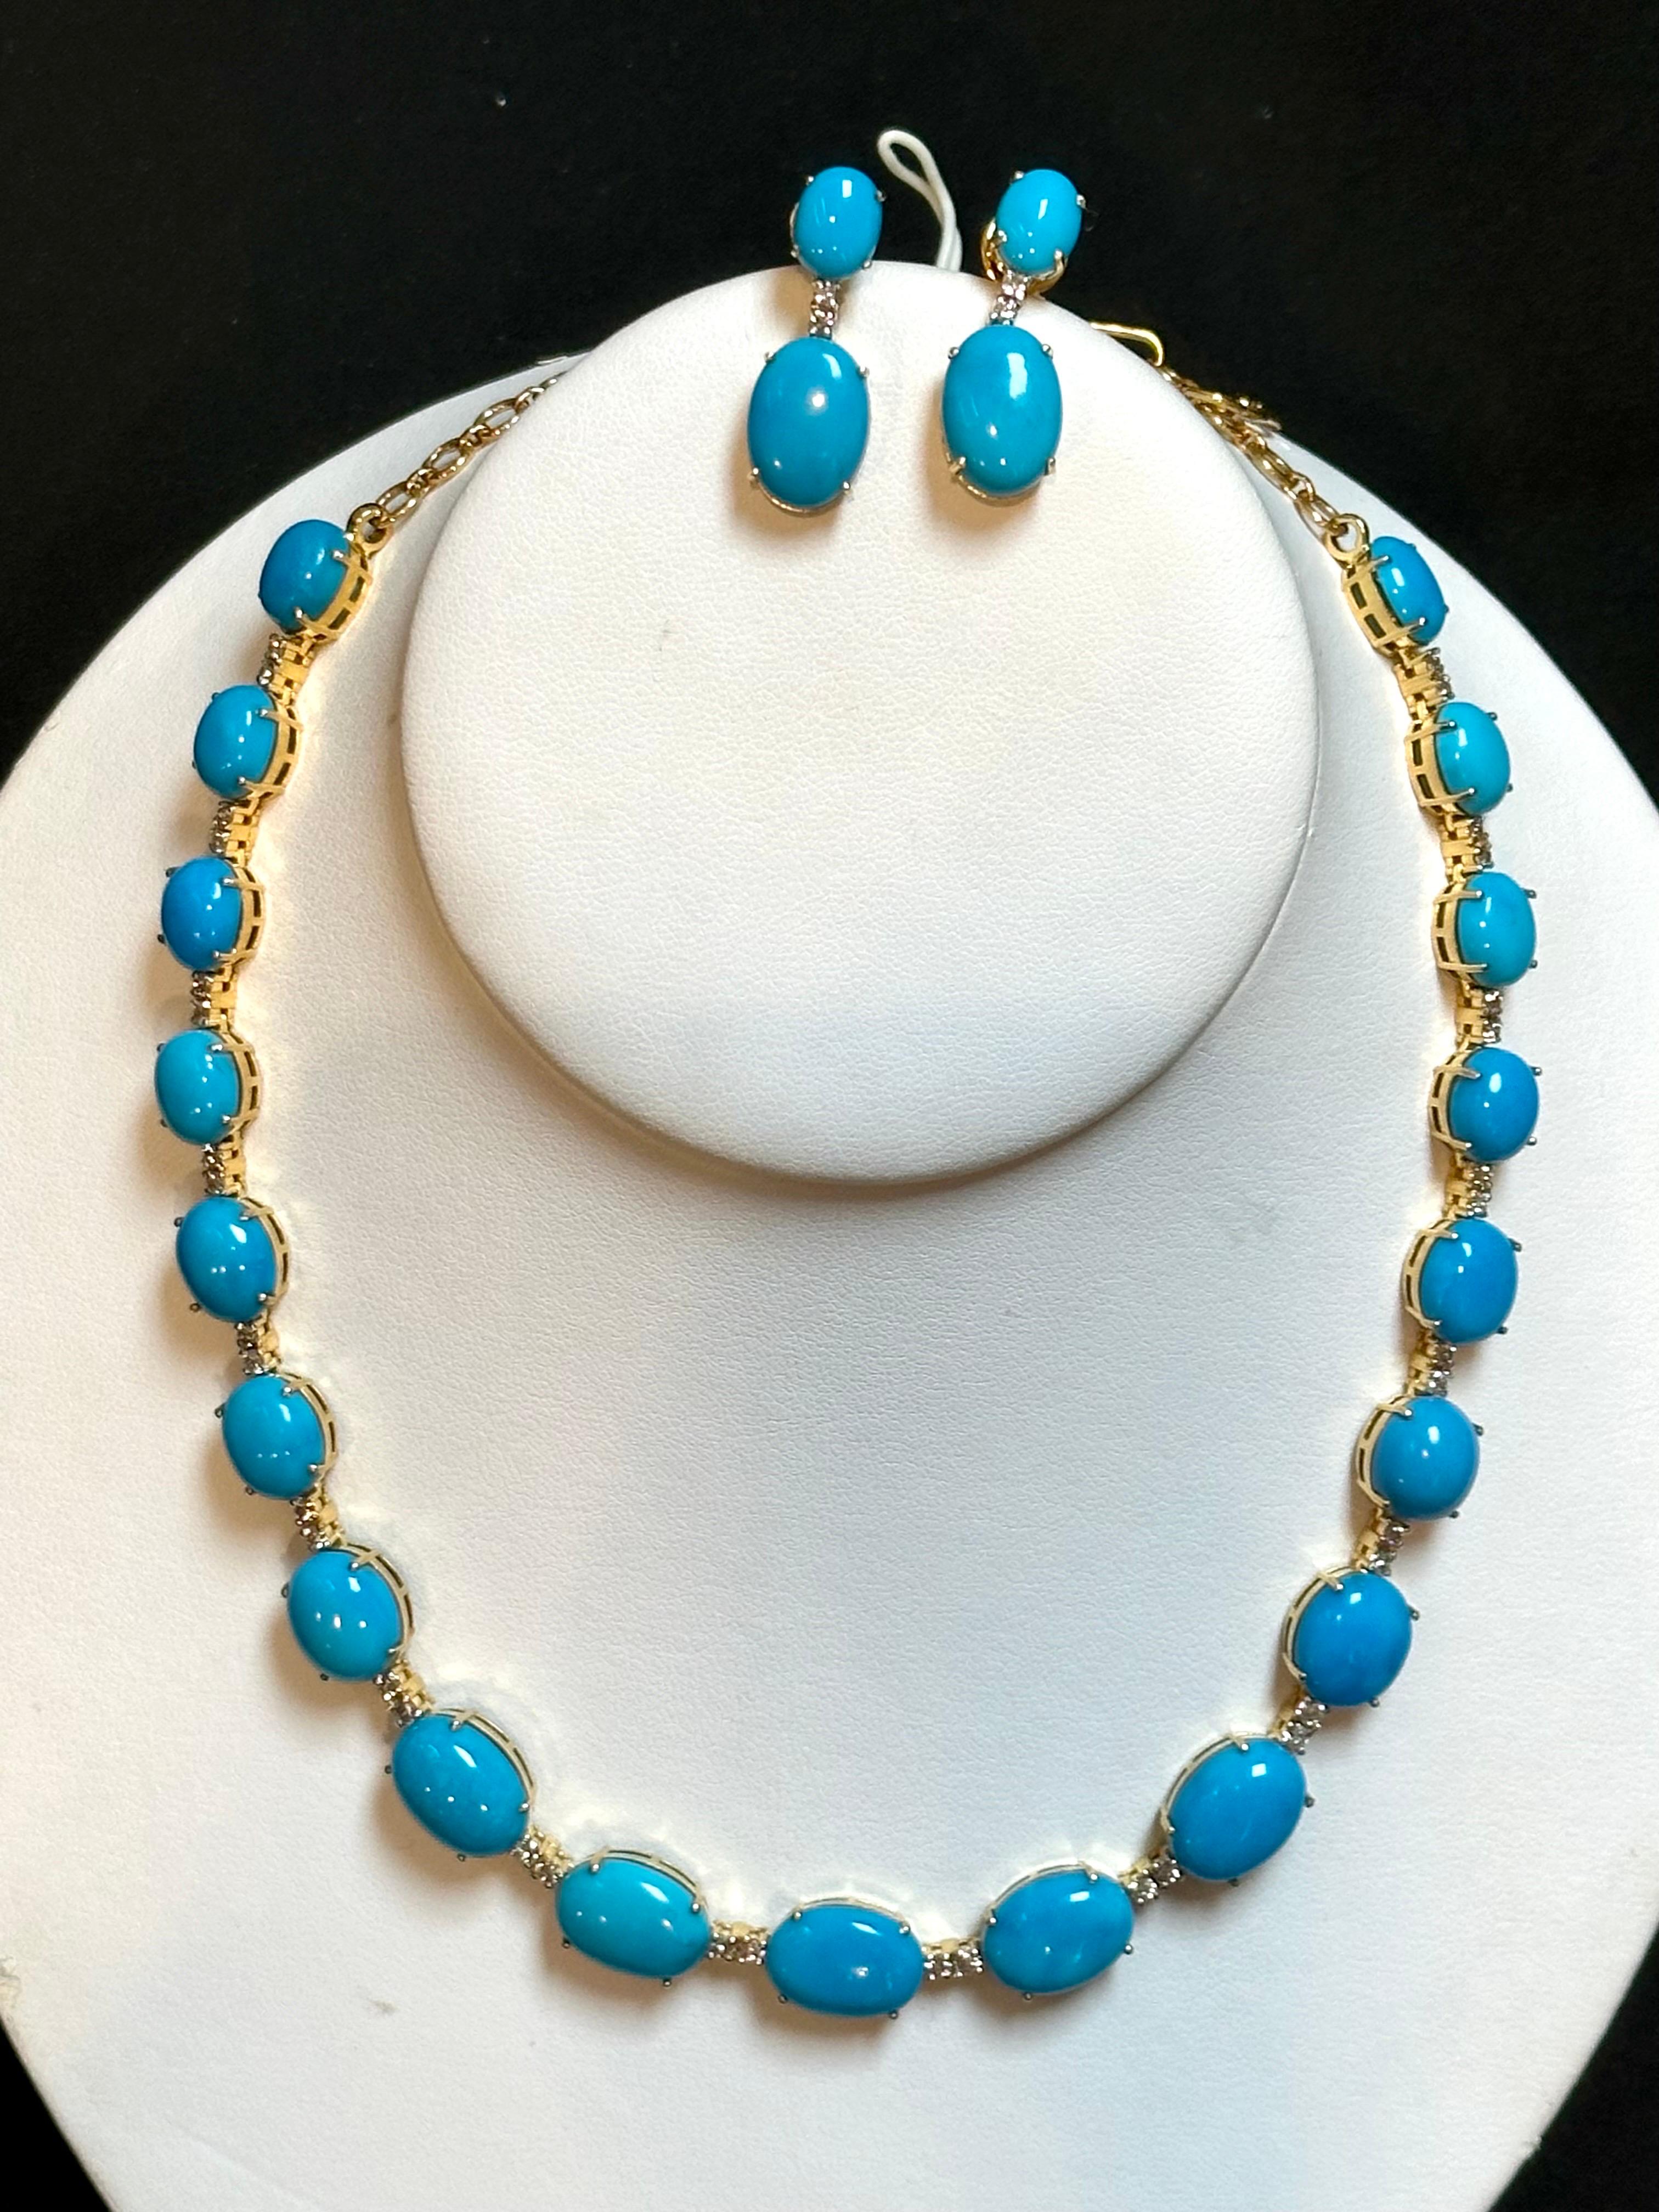 60ct Natural Sleeping Beauty Turquoise & Diamond Tennis Necklace & Earrings Set For Sale 6